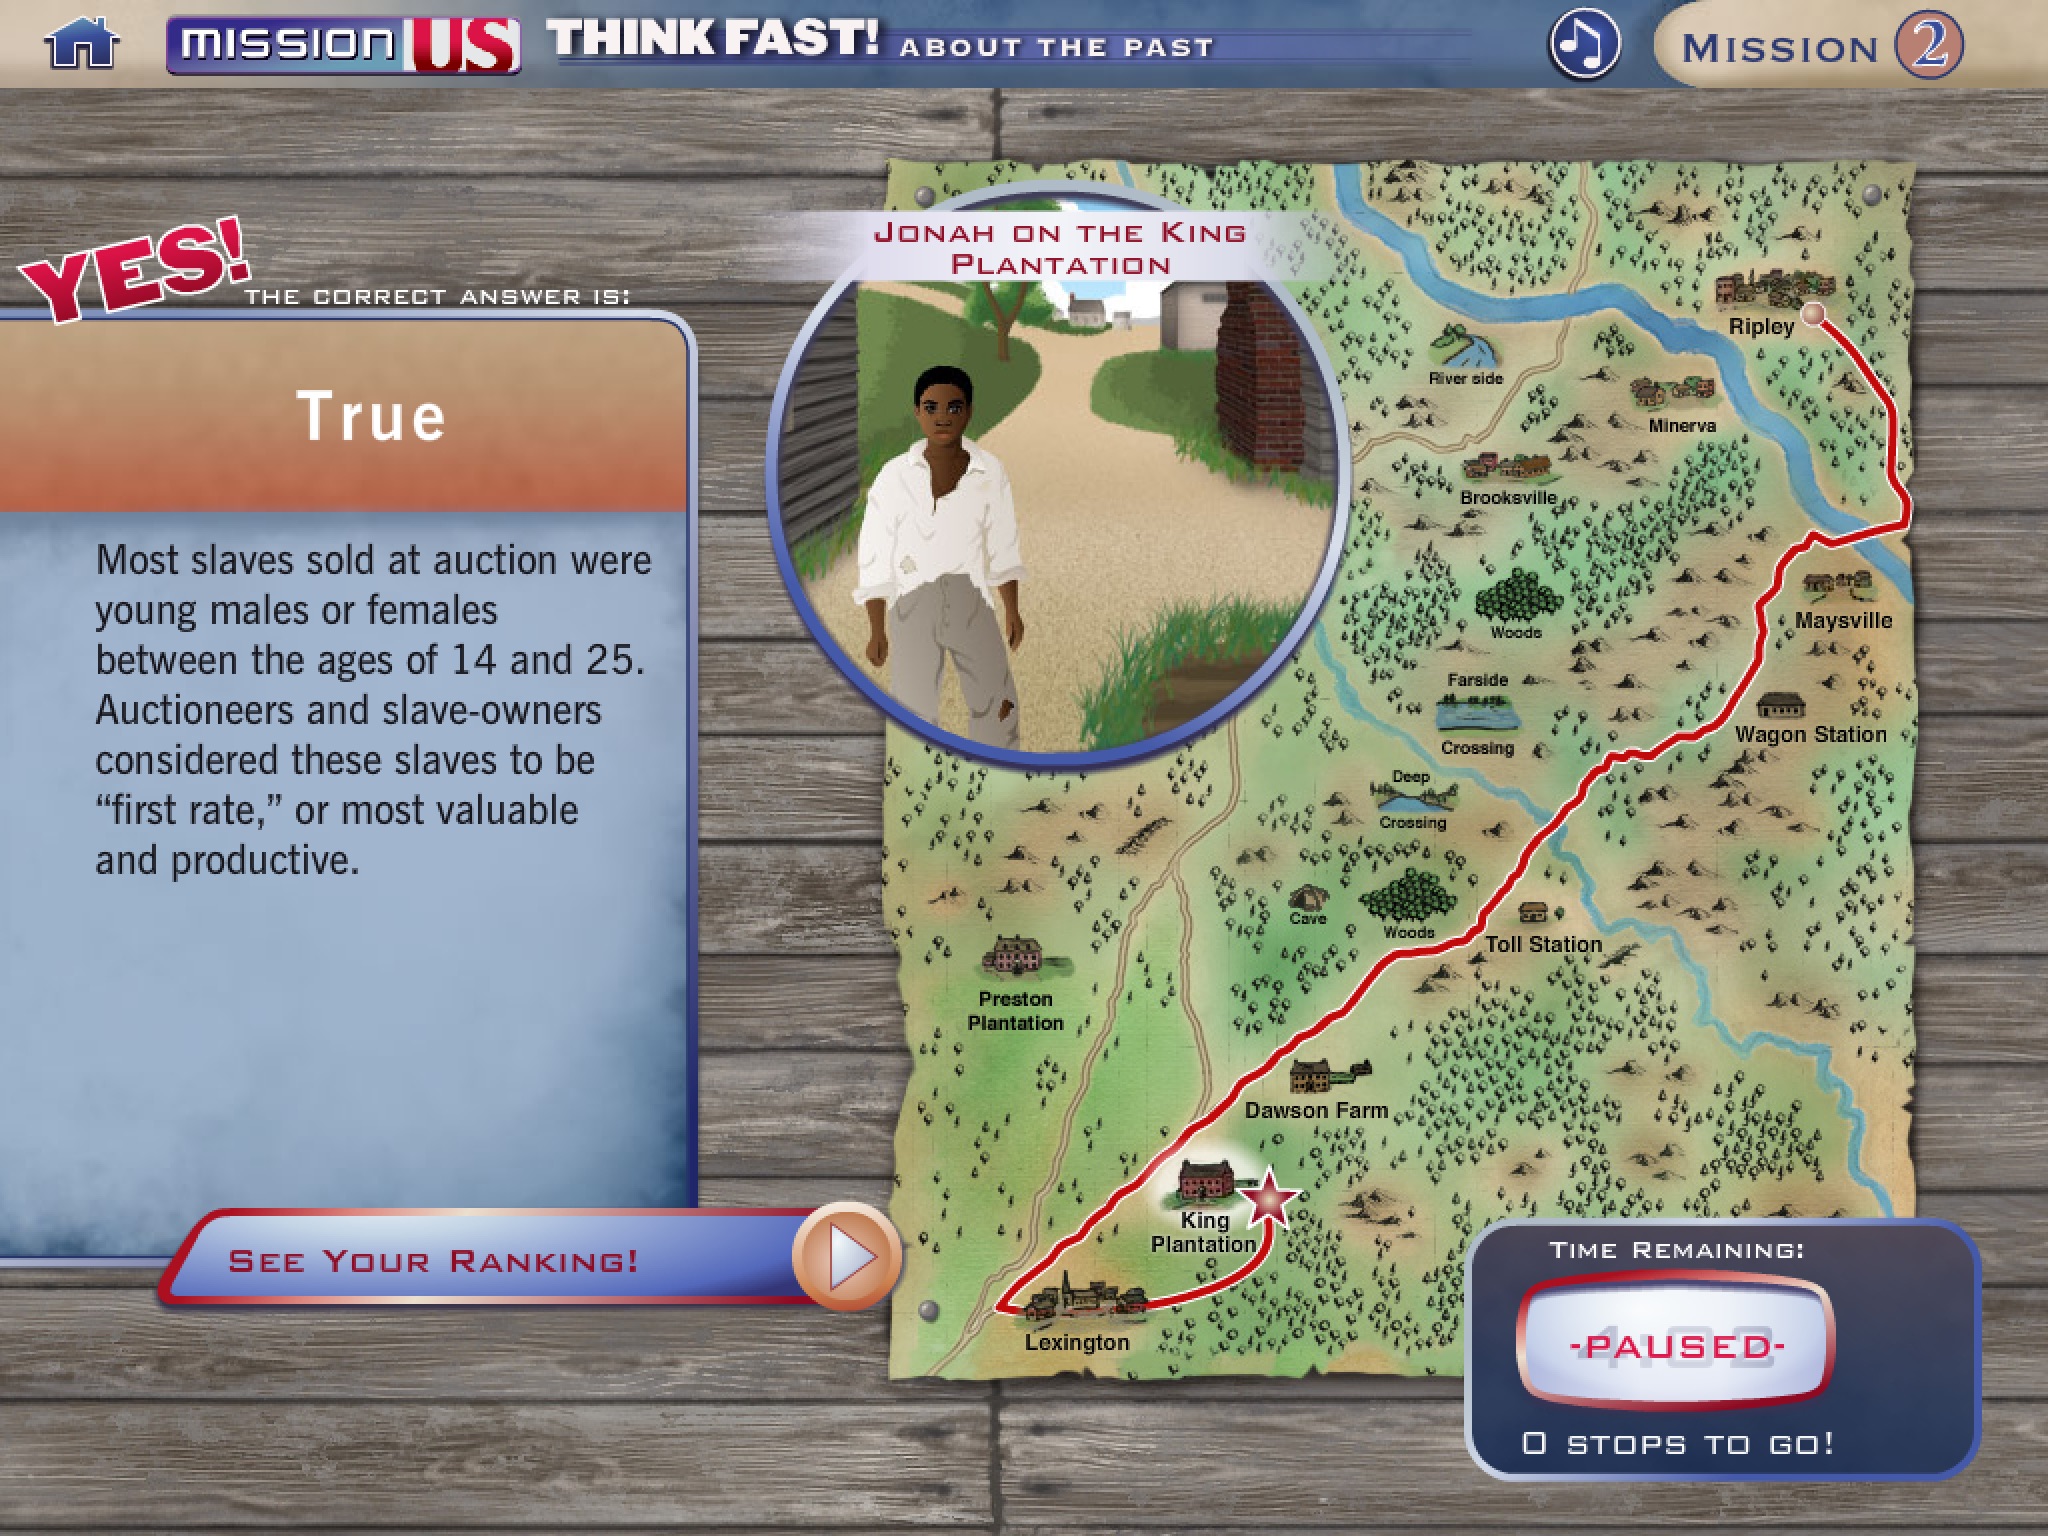 Mission US: Think Fast! About the Past screenshot 4